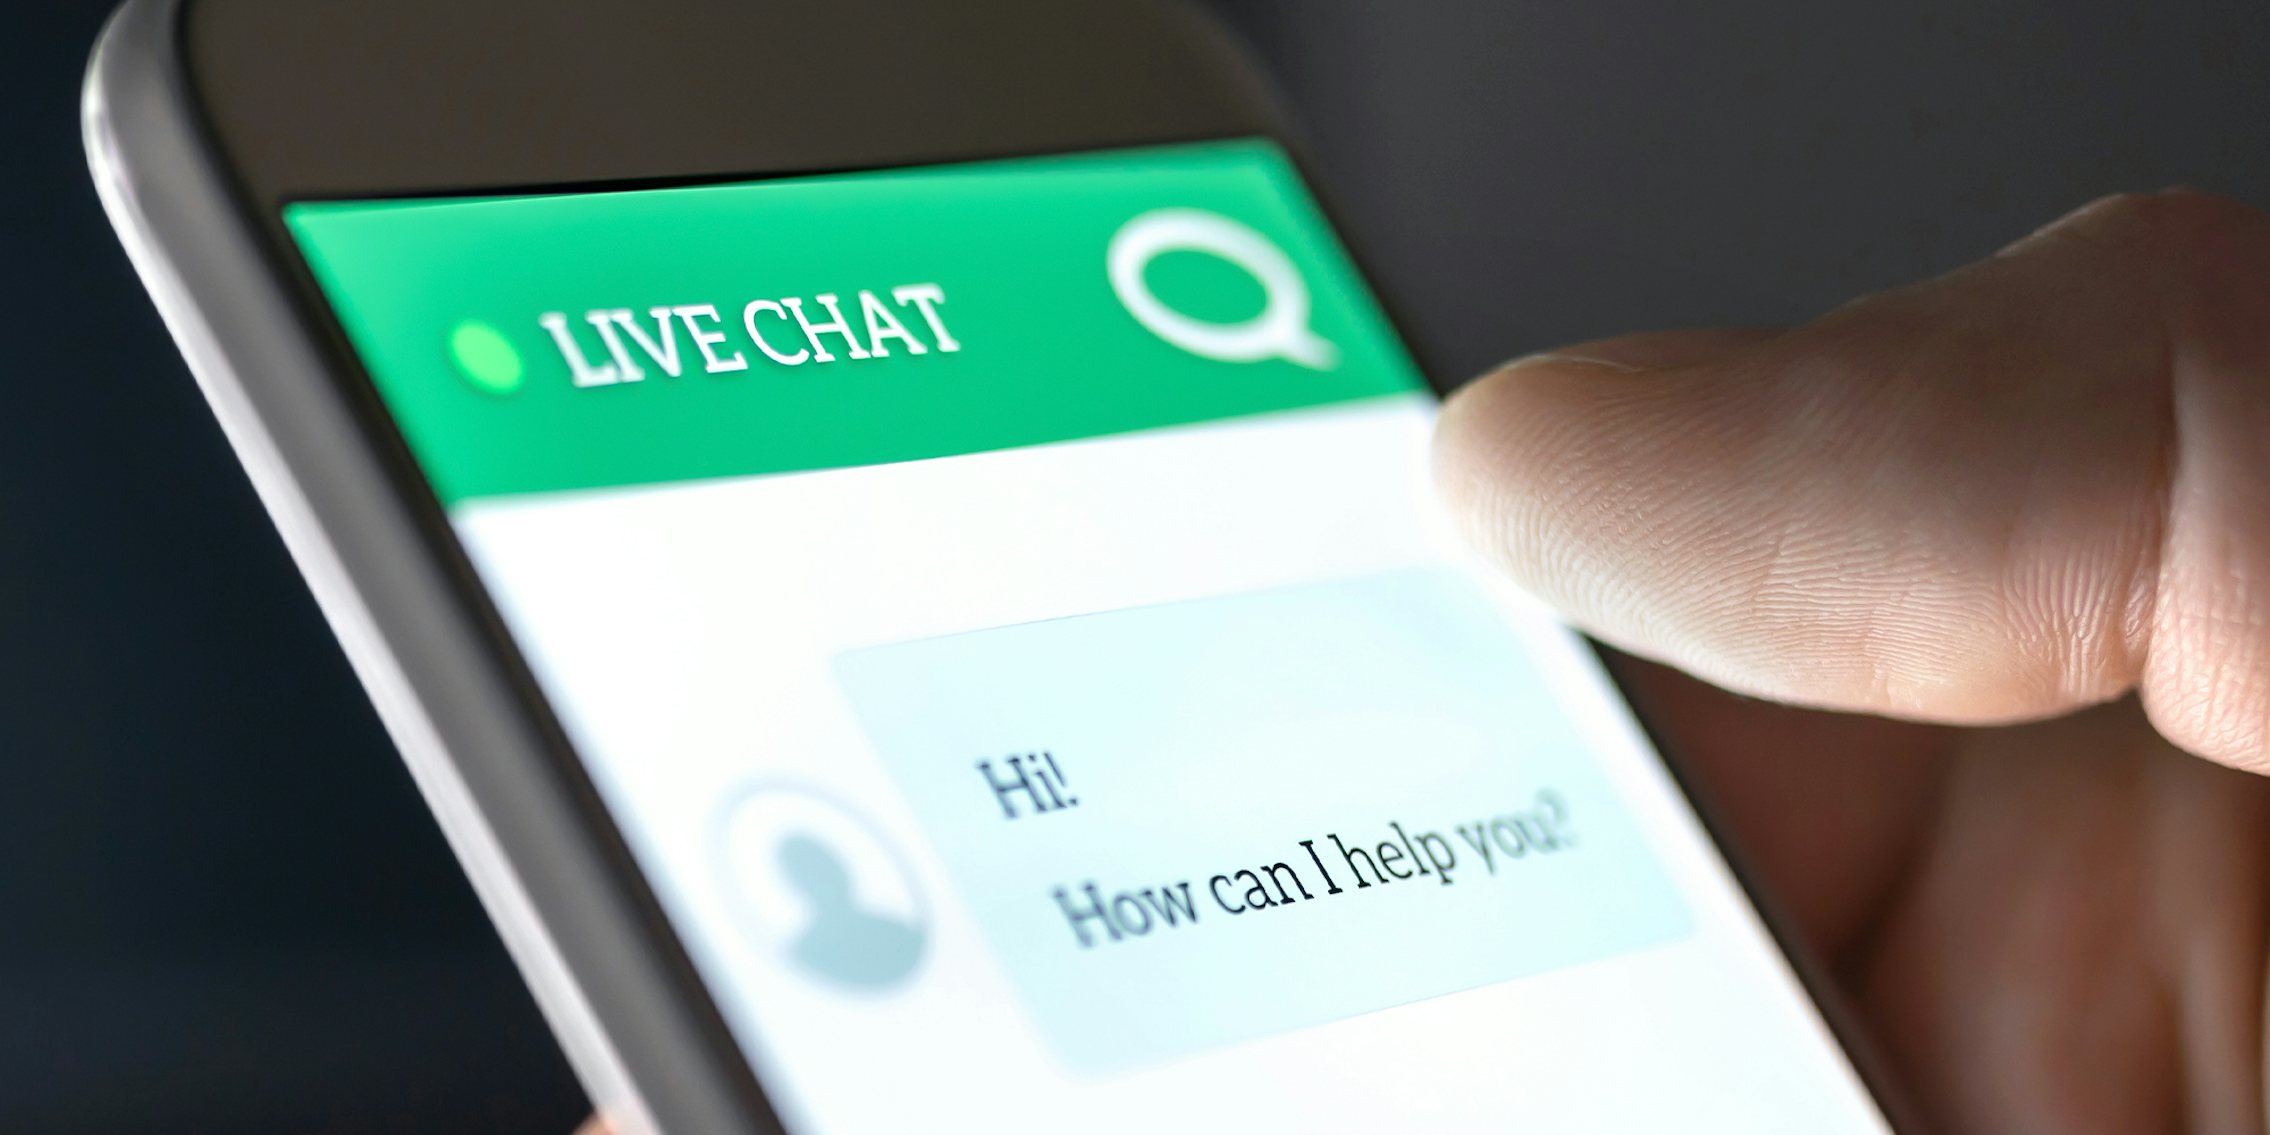 Customer service and support live chat with chatbot and automatic messages or human servant